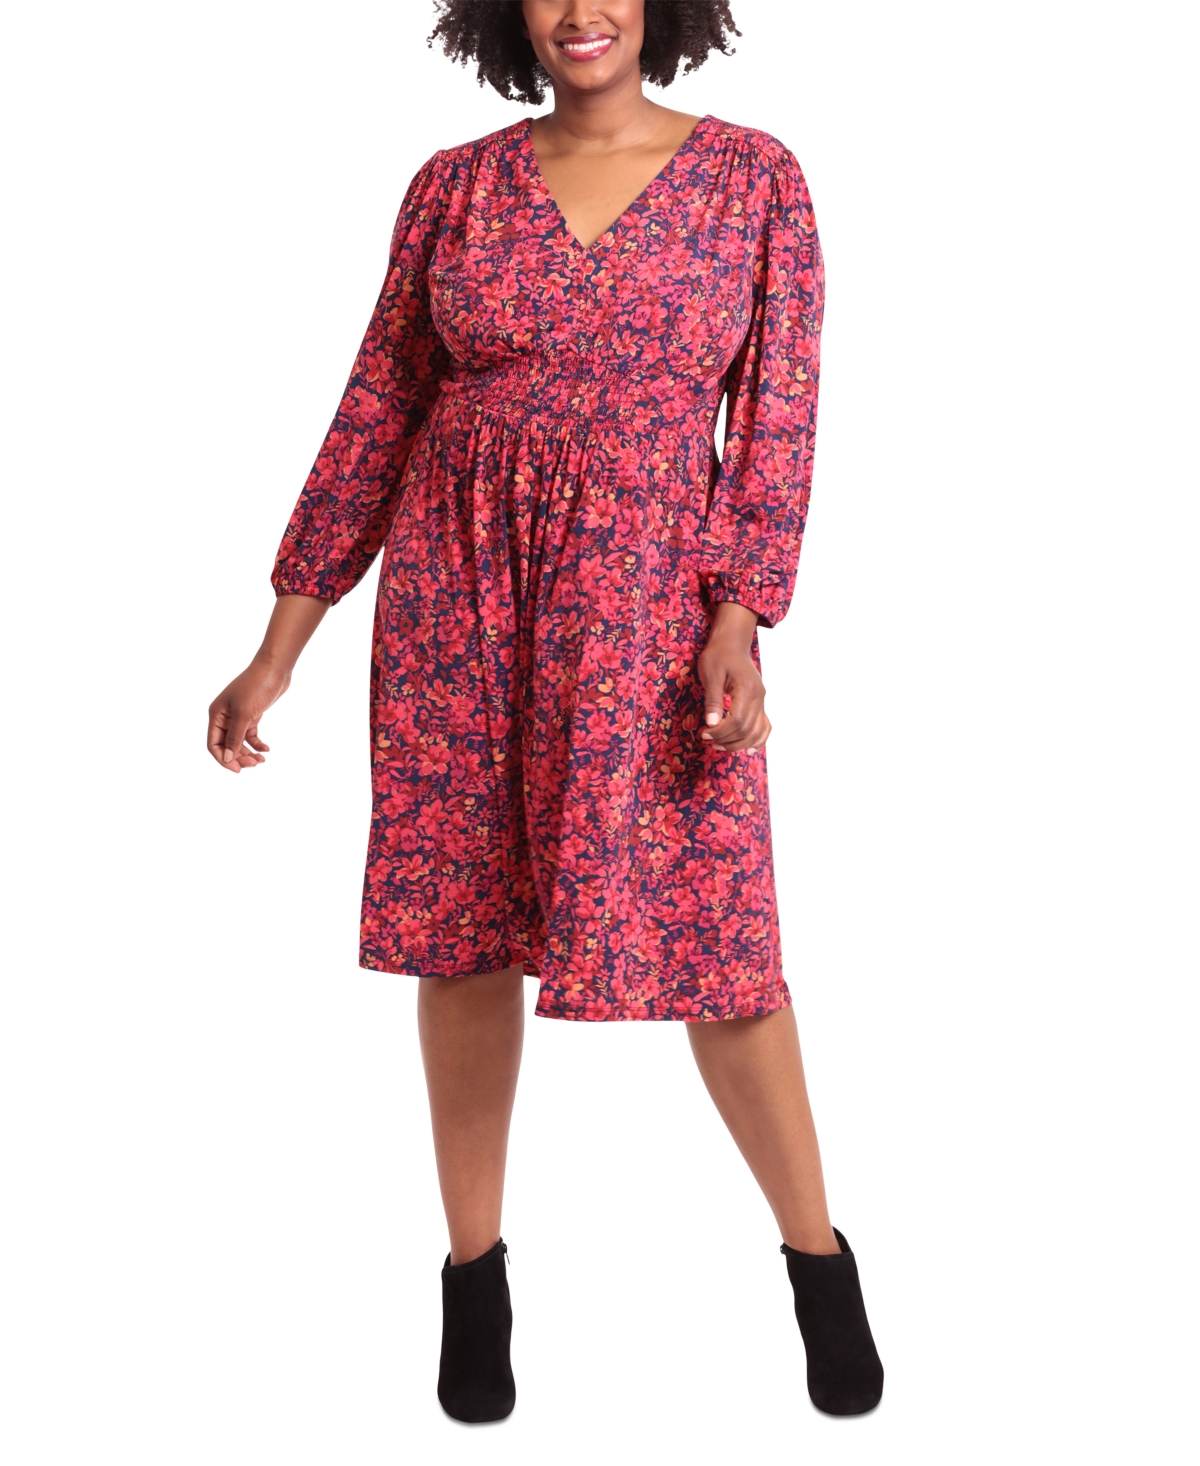 Plus Size Smocked-Trim Long-Sleeve Dress - Red/Navy